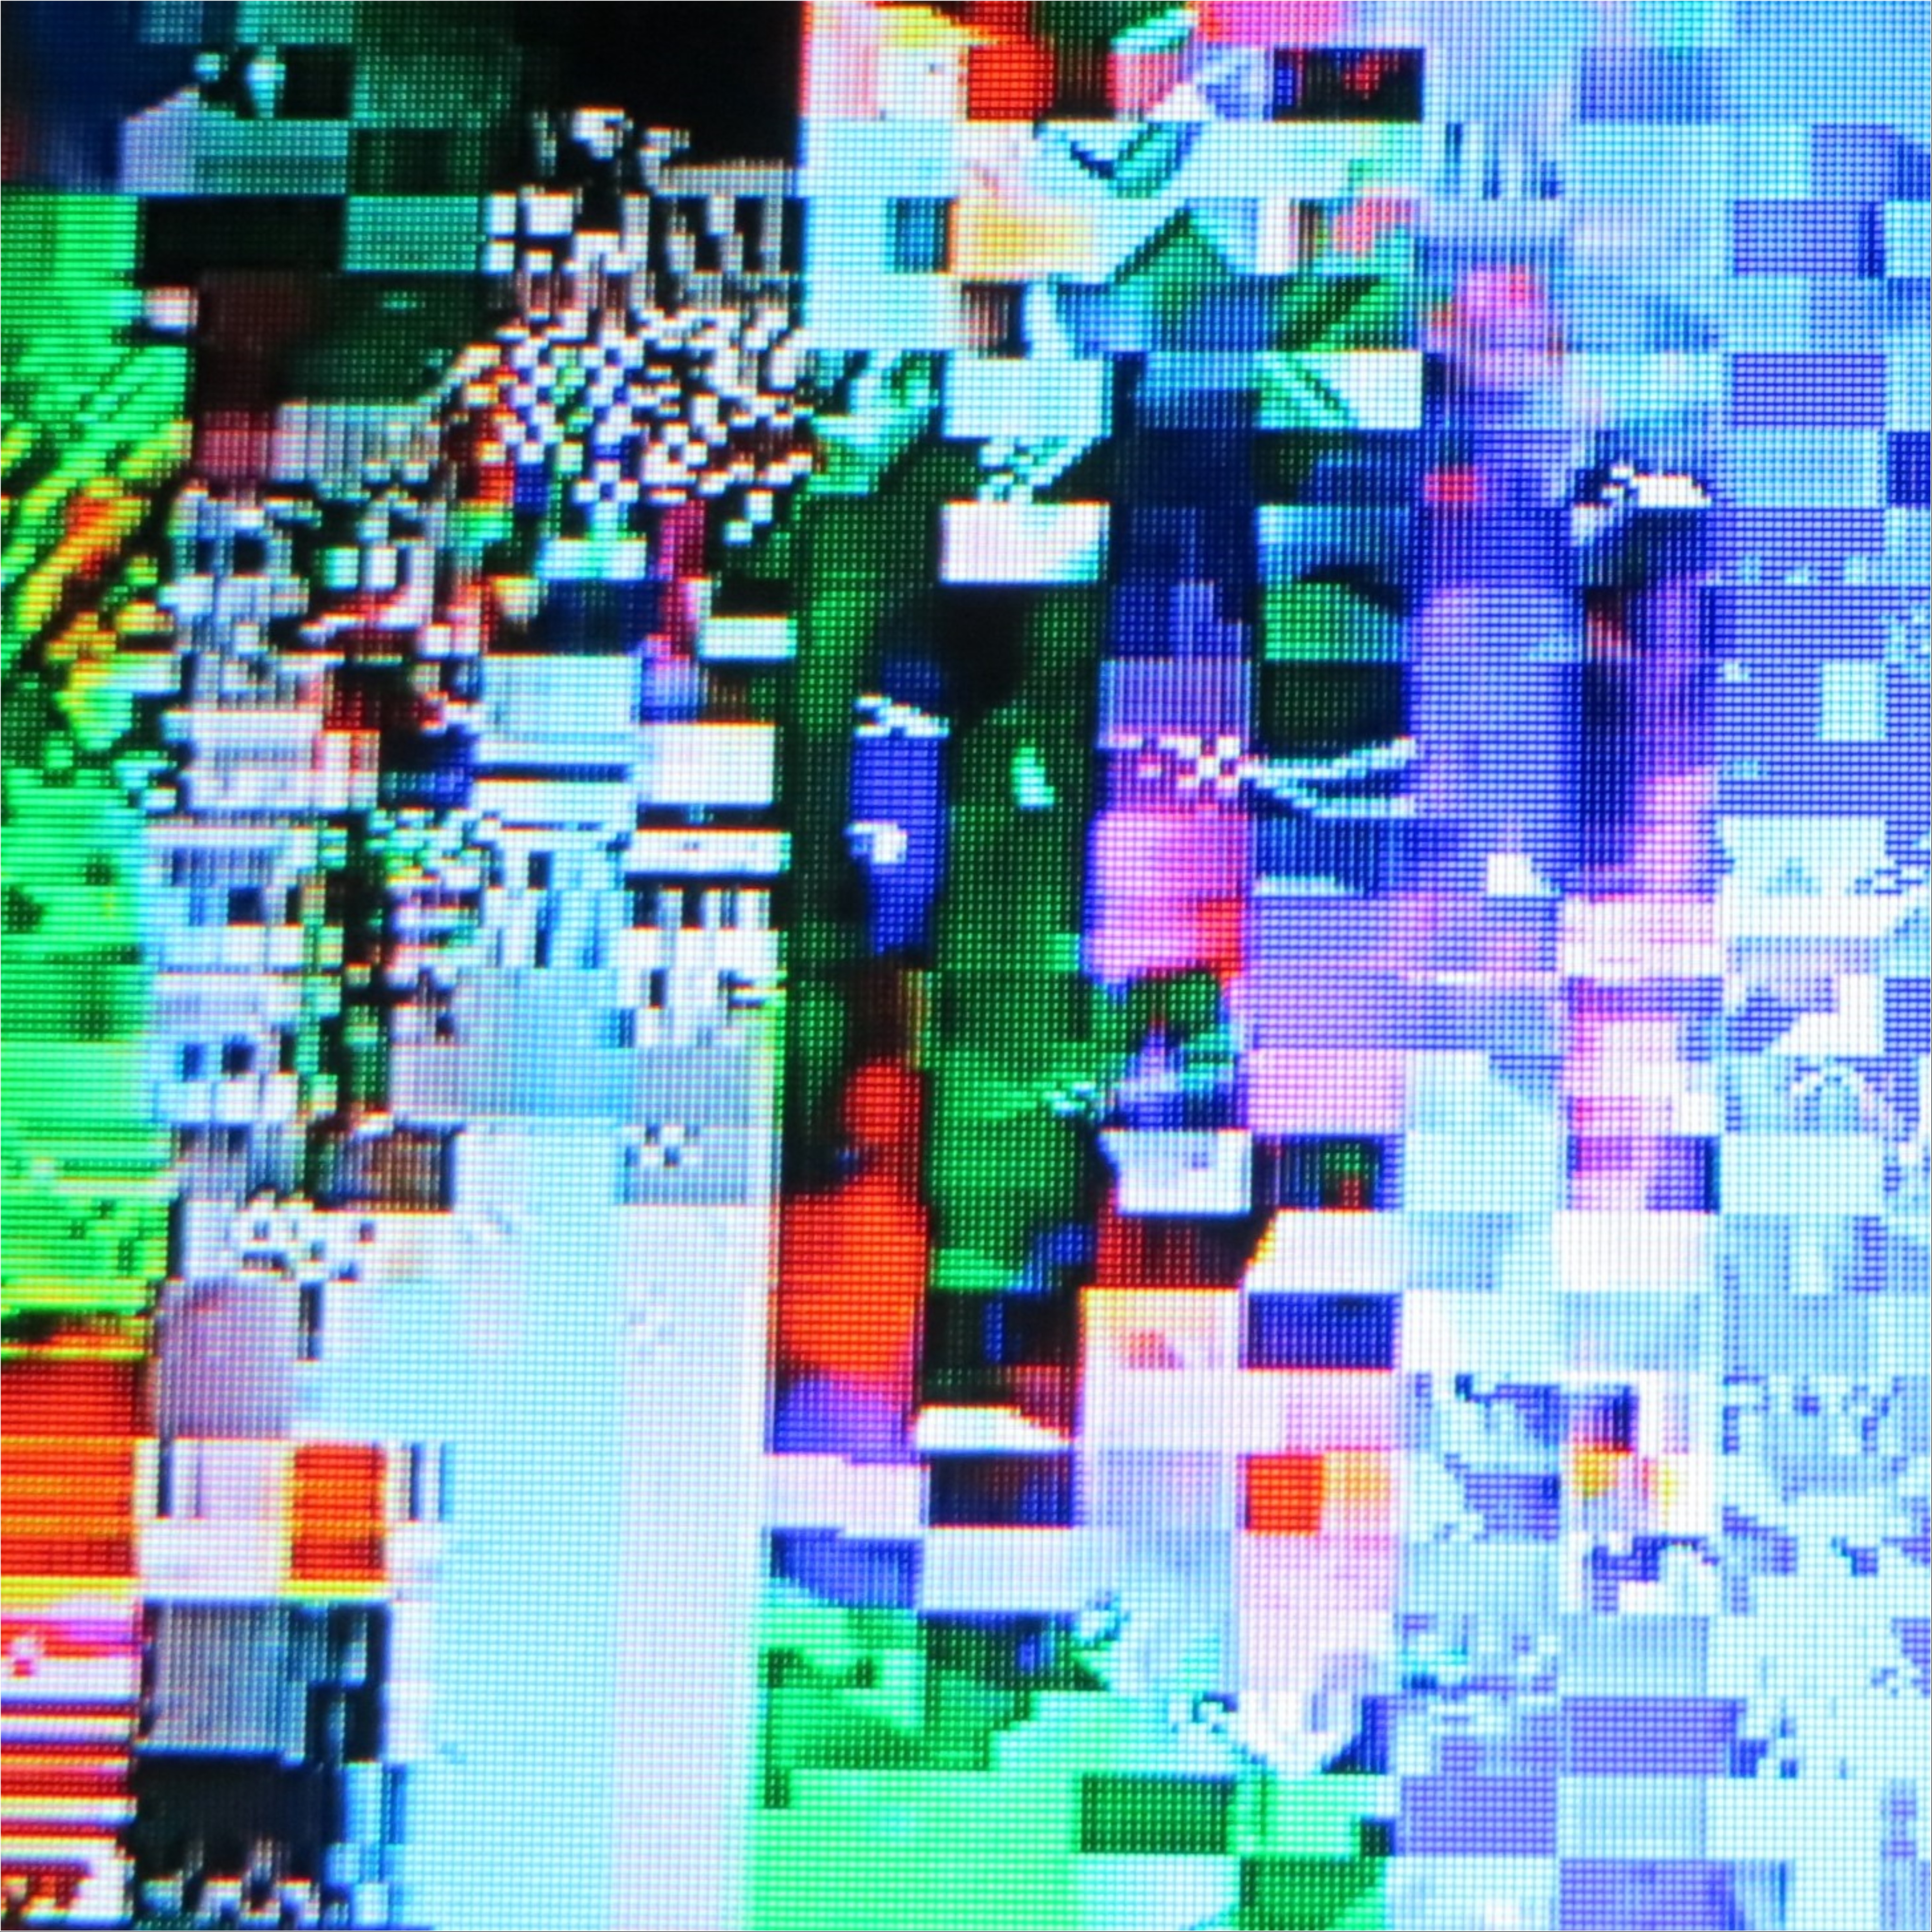 Televisual Glitch Abstraction VII